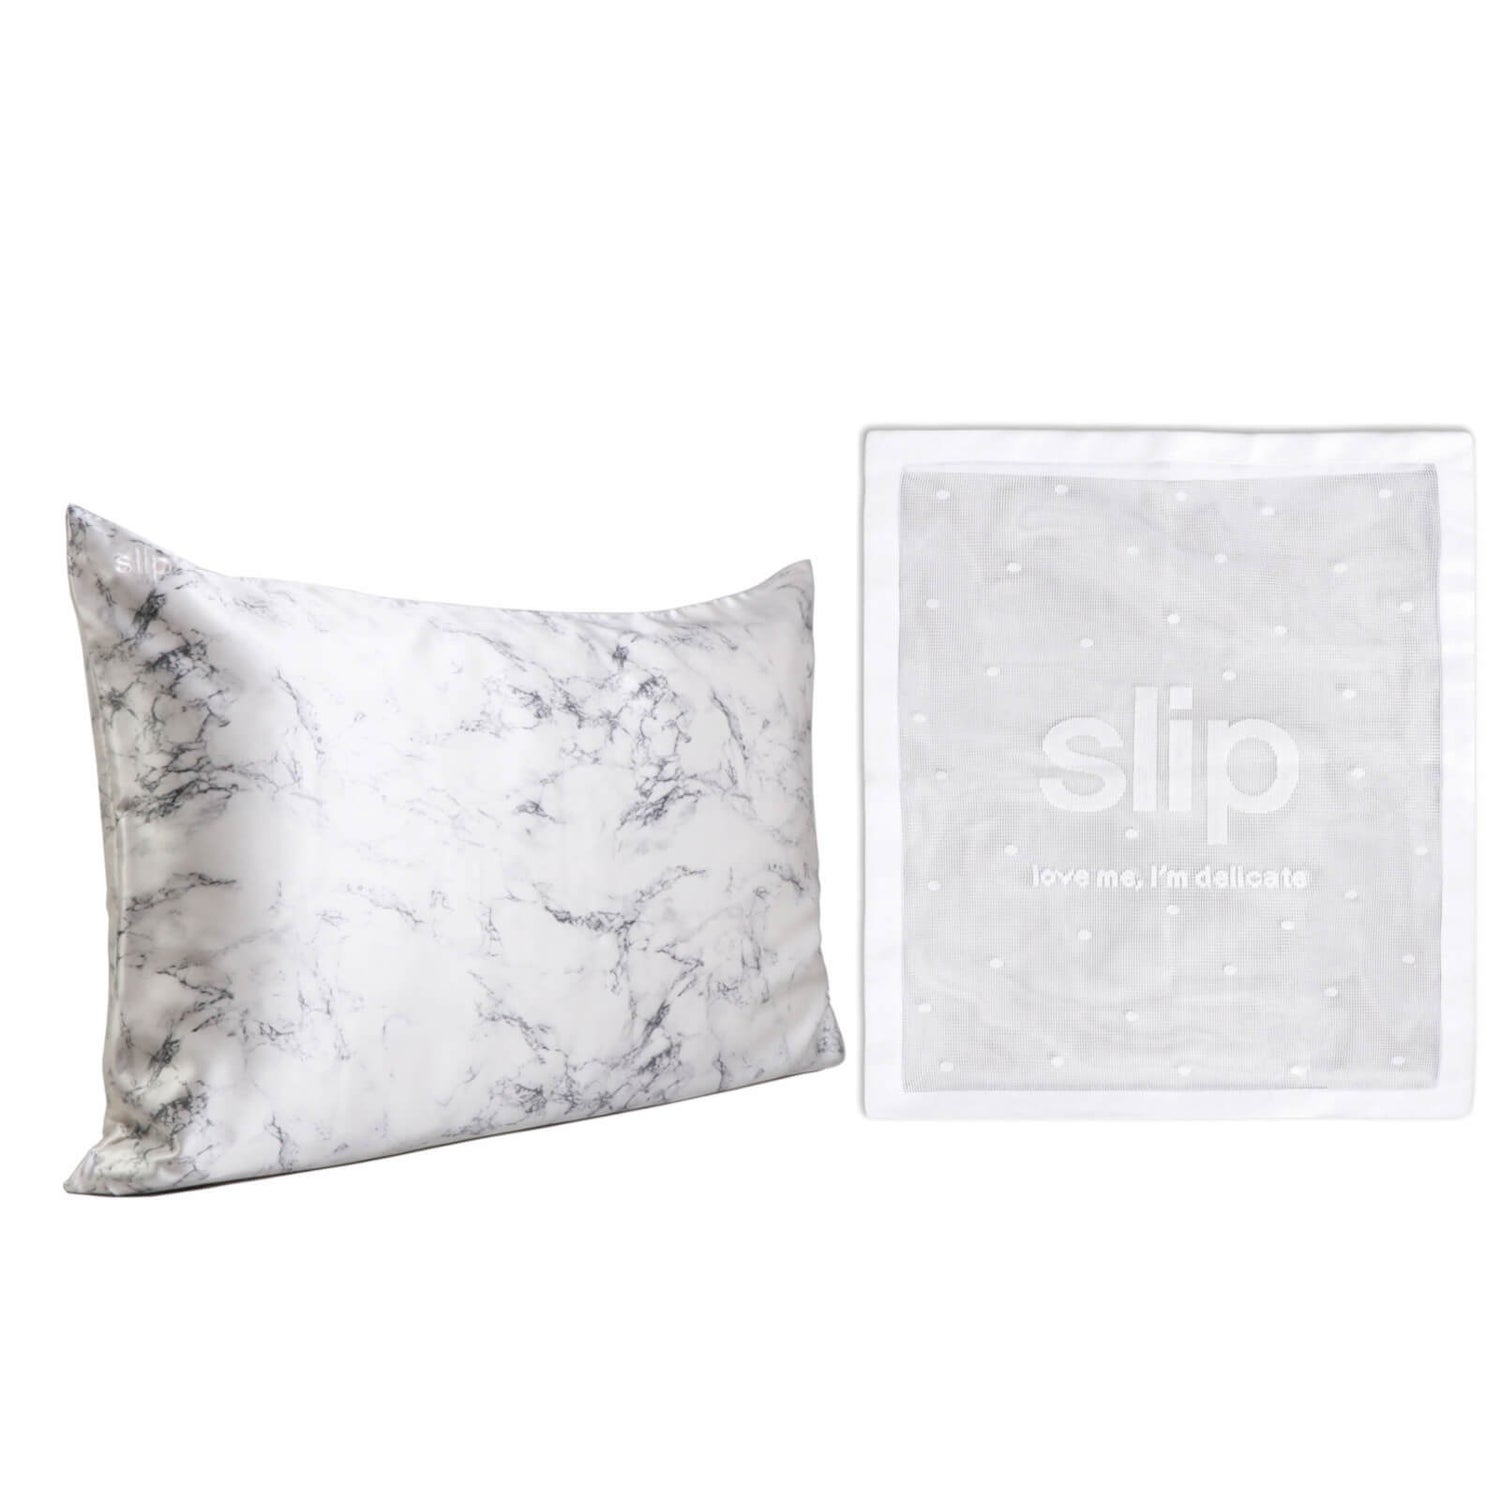 Slip Dermstore Exclusive Silk Marble Pillowcase Duo and Delicates Bag (Worth $193.00)